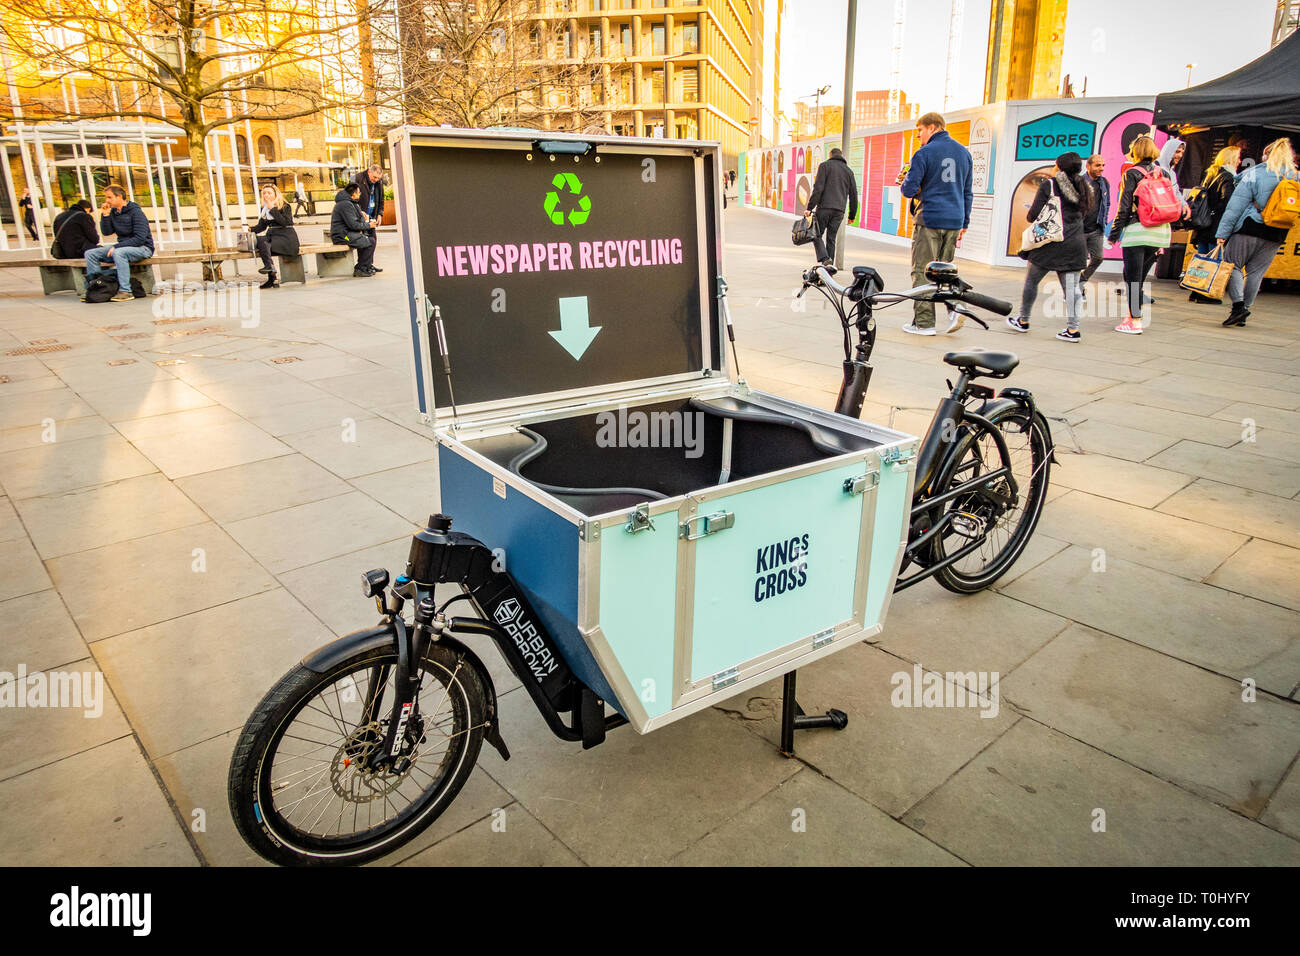 The Urban Arrow Cargo Bike with the cargo lid open ready for recycling newspapers near Kings Cross Station in London, England Stock Photo